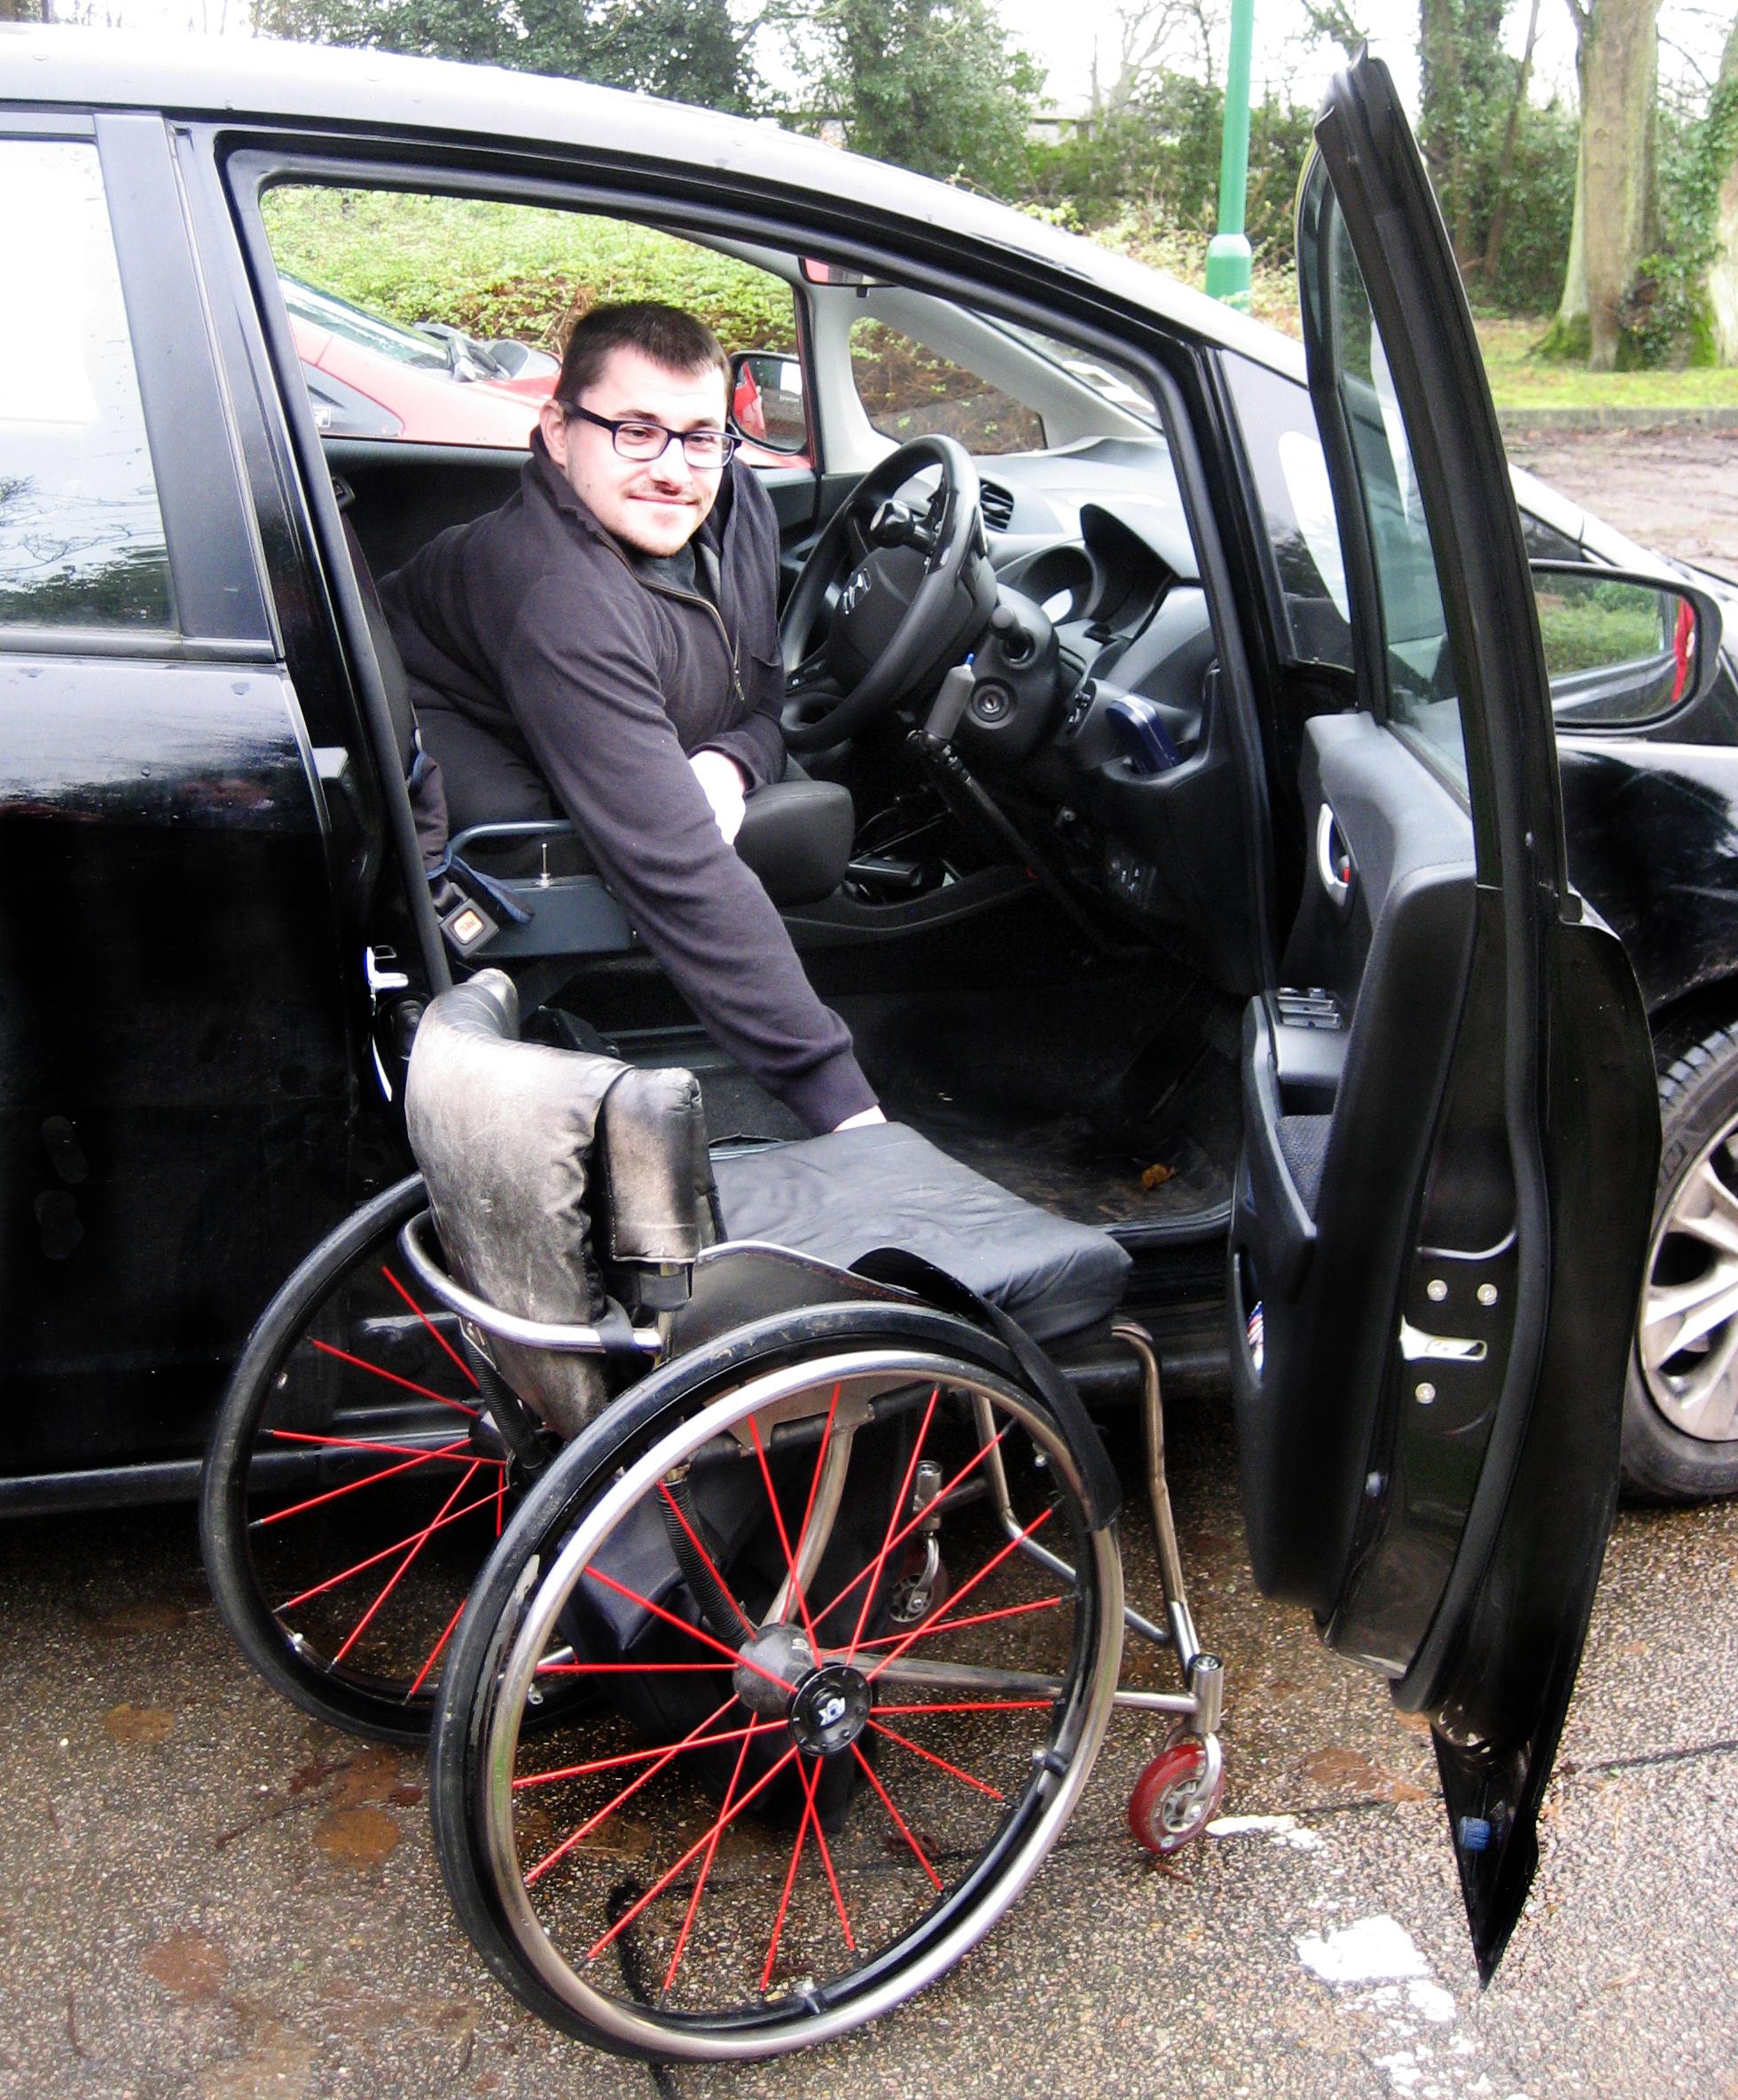 ShopMobility UK and Disabled Motoring UK – working together to achieve the best mobility opportunities for all